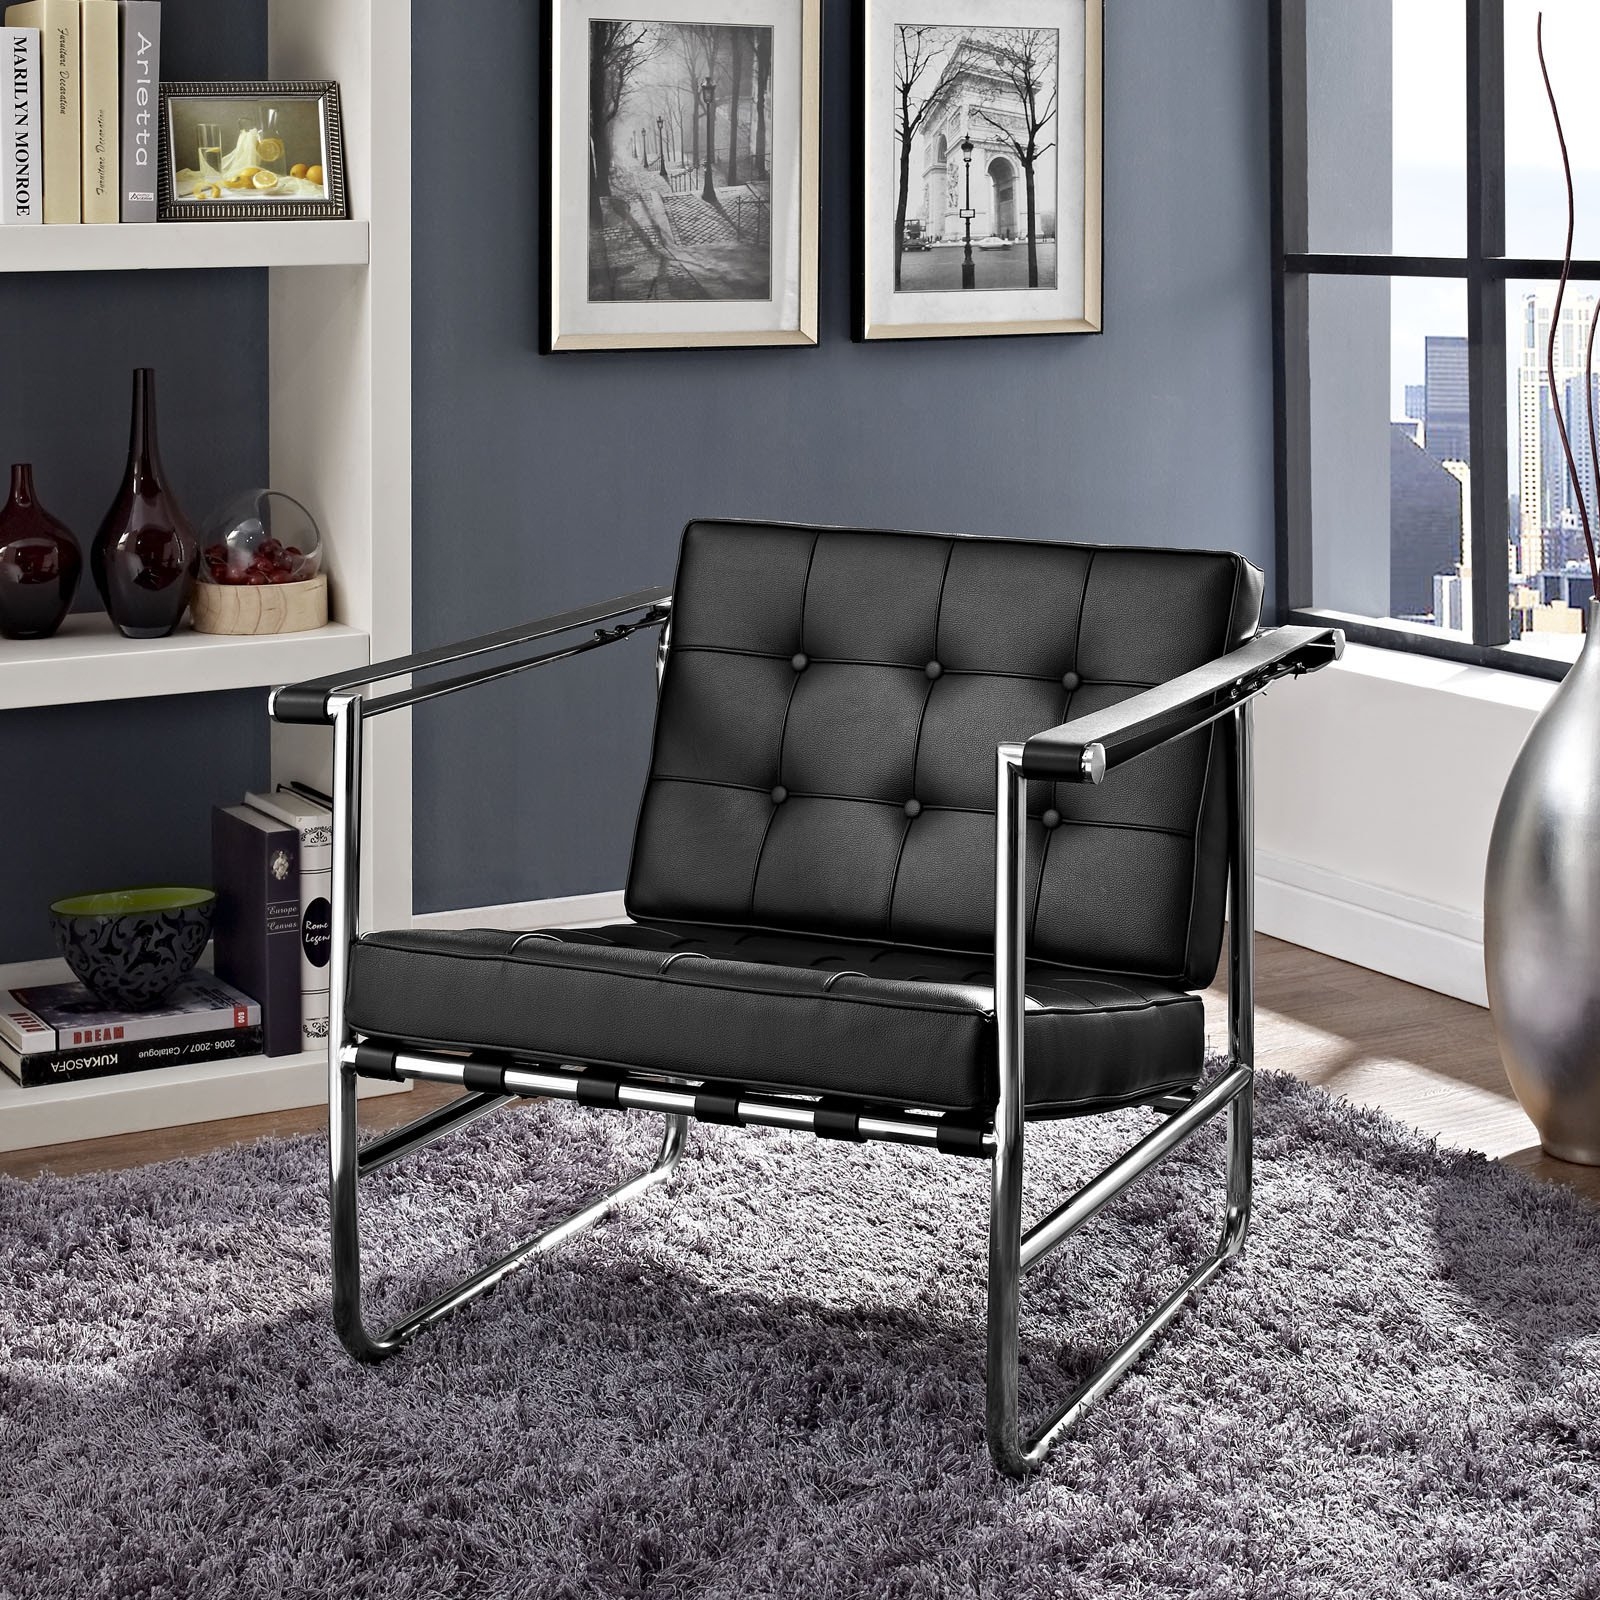 Poise stainless steel lounge chair